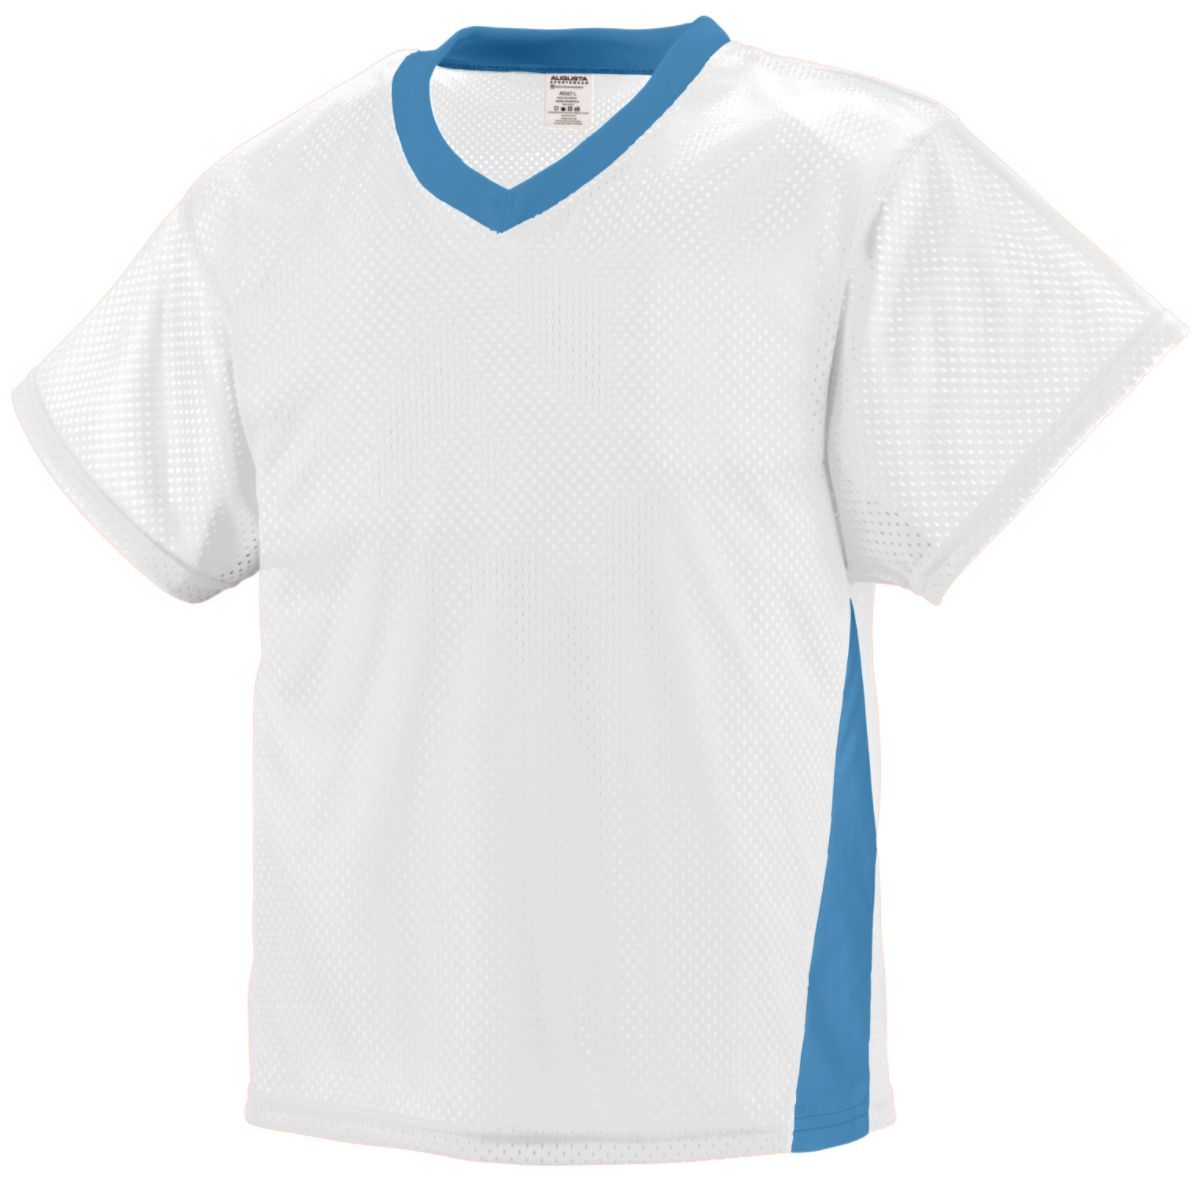 Augusta Sportswear High Score Jersey in White/Columbia Blue  -Part of the Adult, Adult-Jersey, Augusta-Products, Lacrosse, Shirts, All-Sports, All-Sports-1 product lines at KanaleyCreations.com